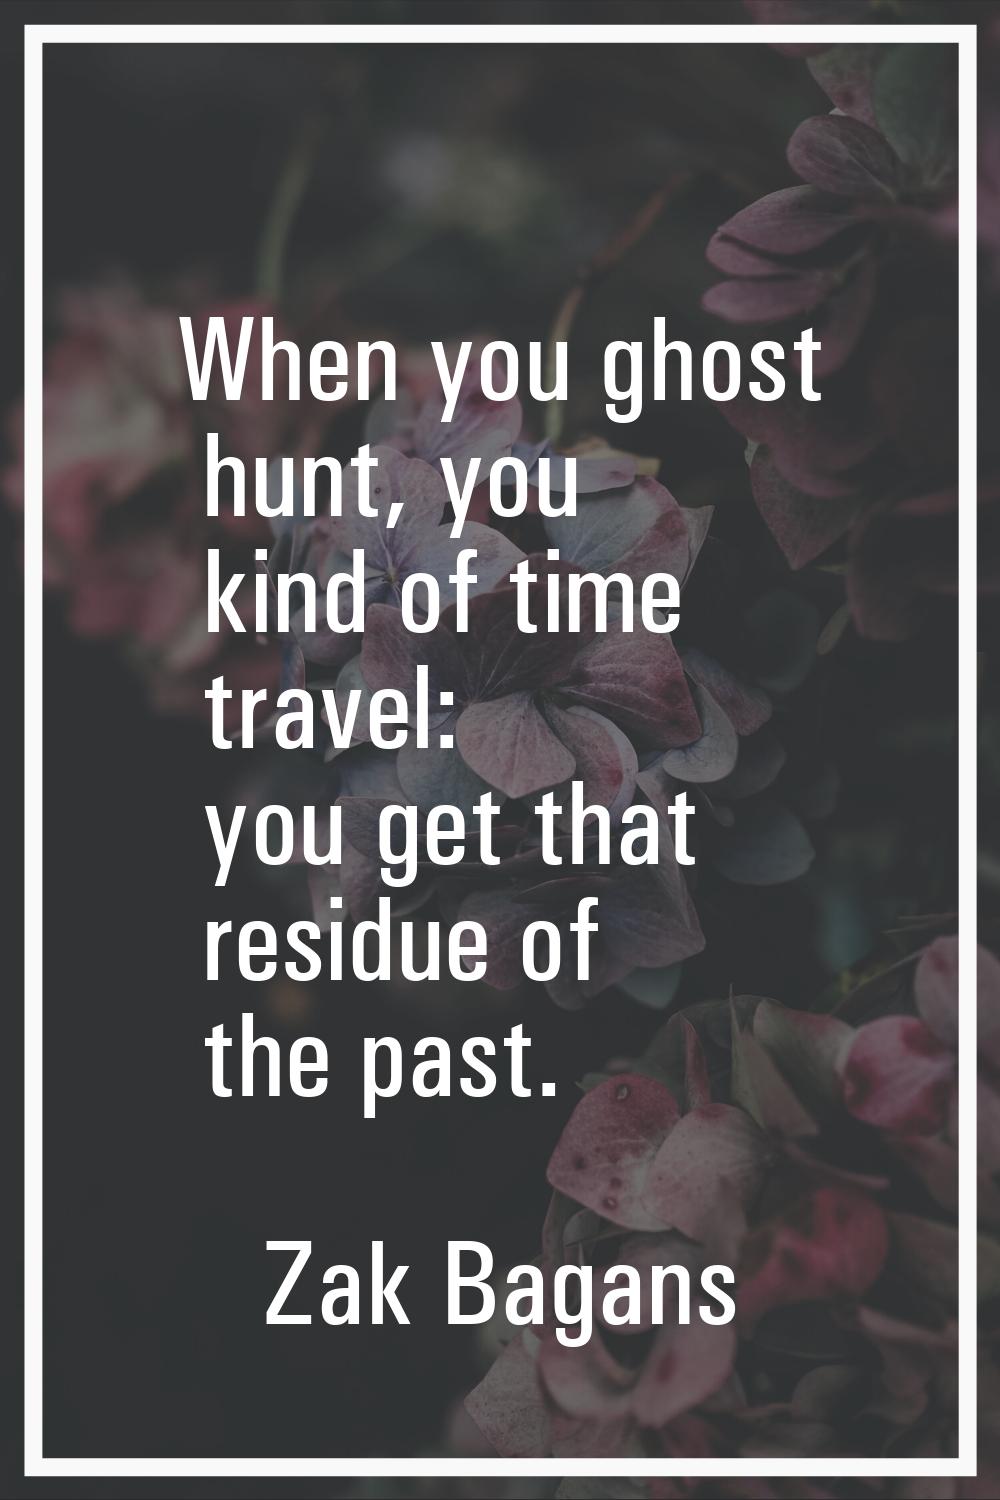 When you ghost hunt, you kind of time travel: you get that residue of the past.